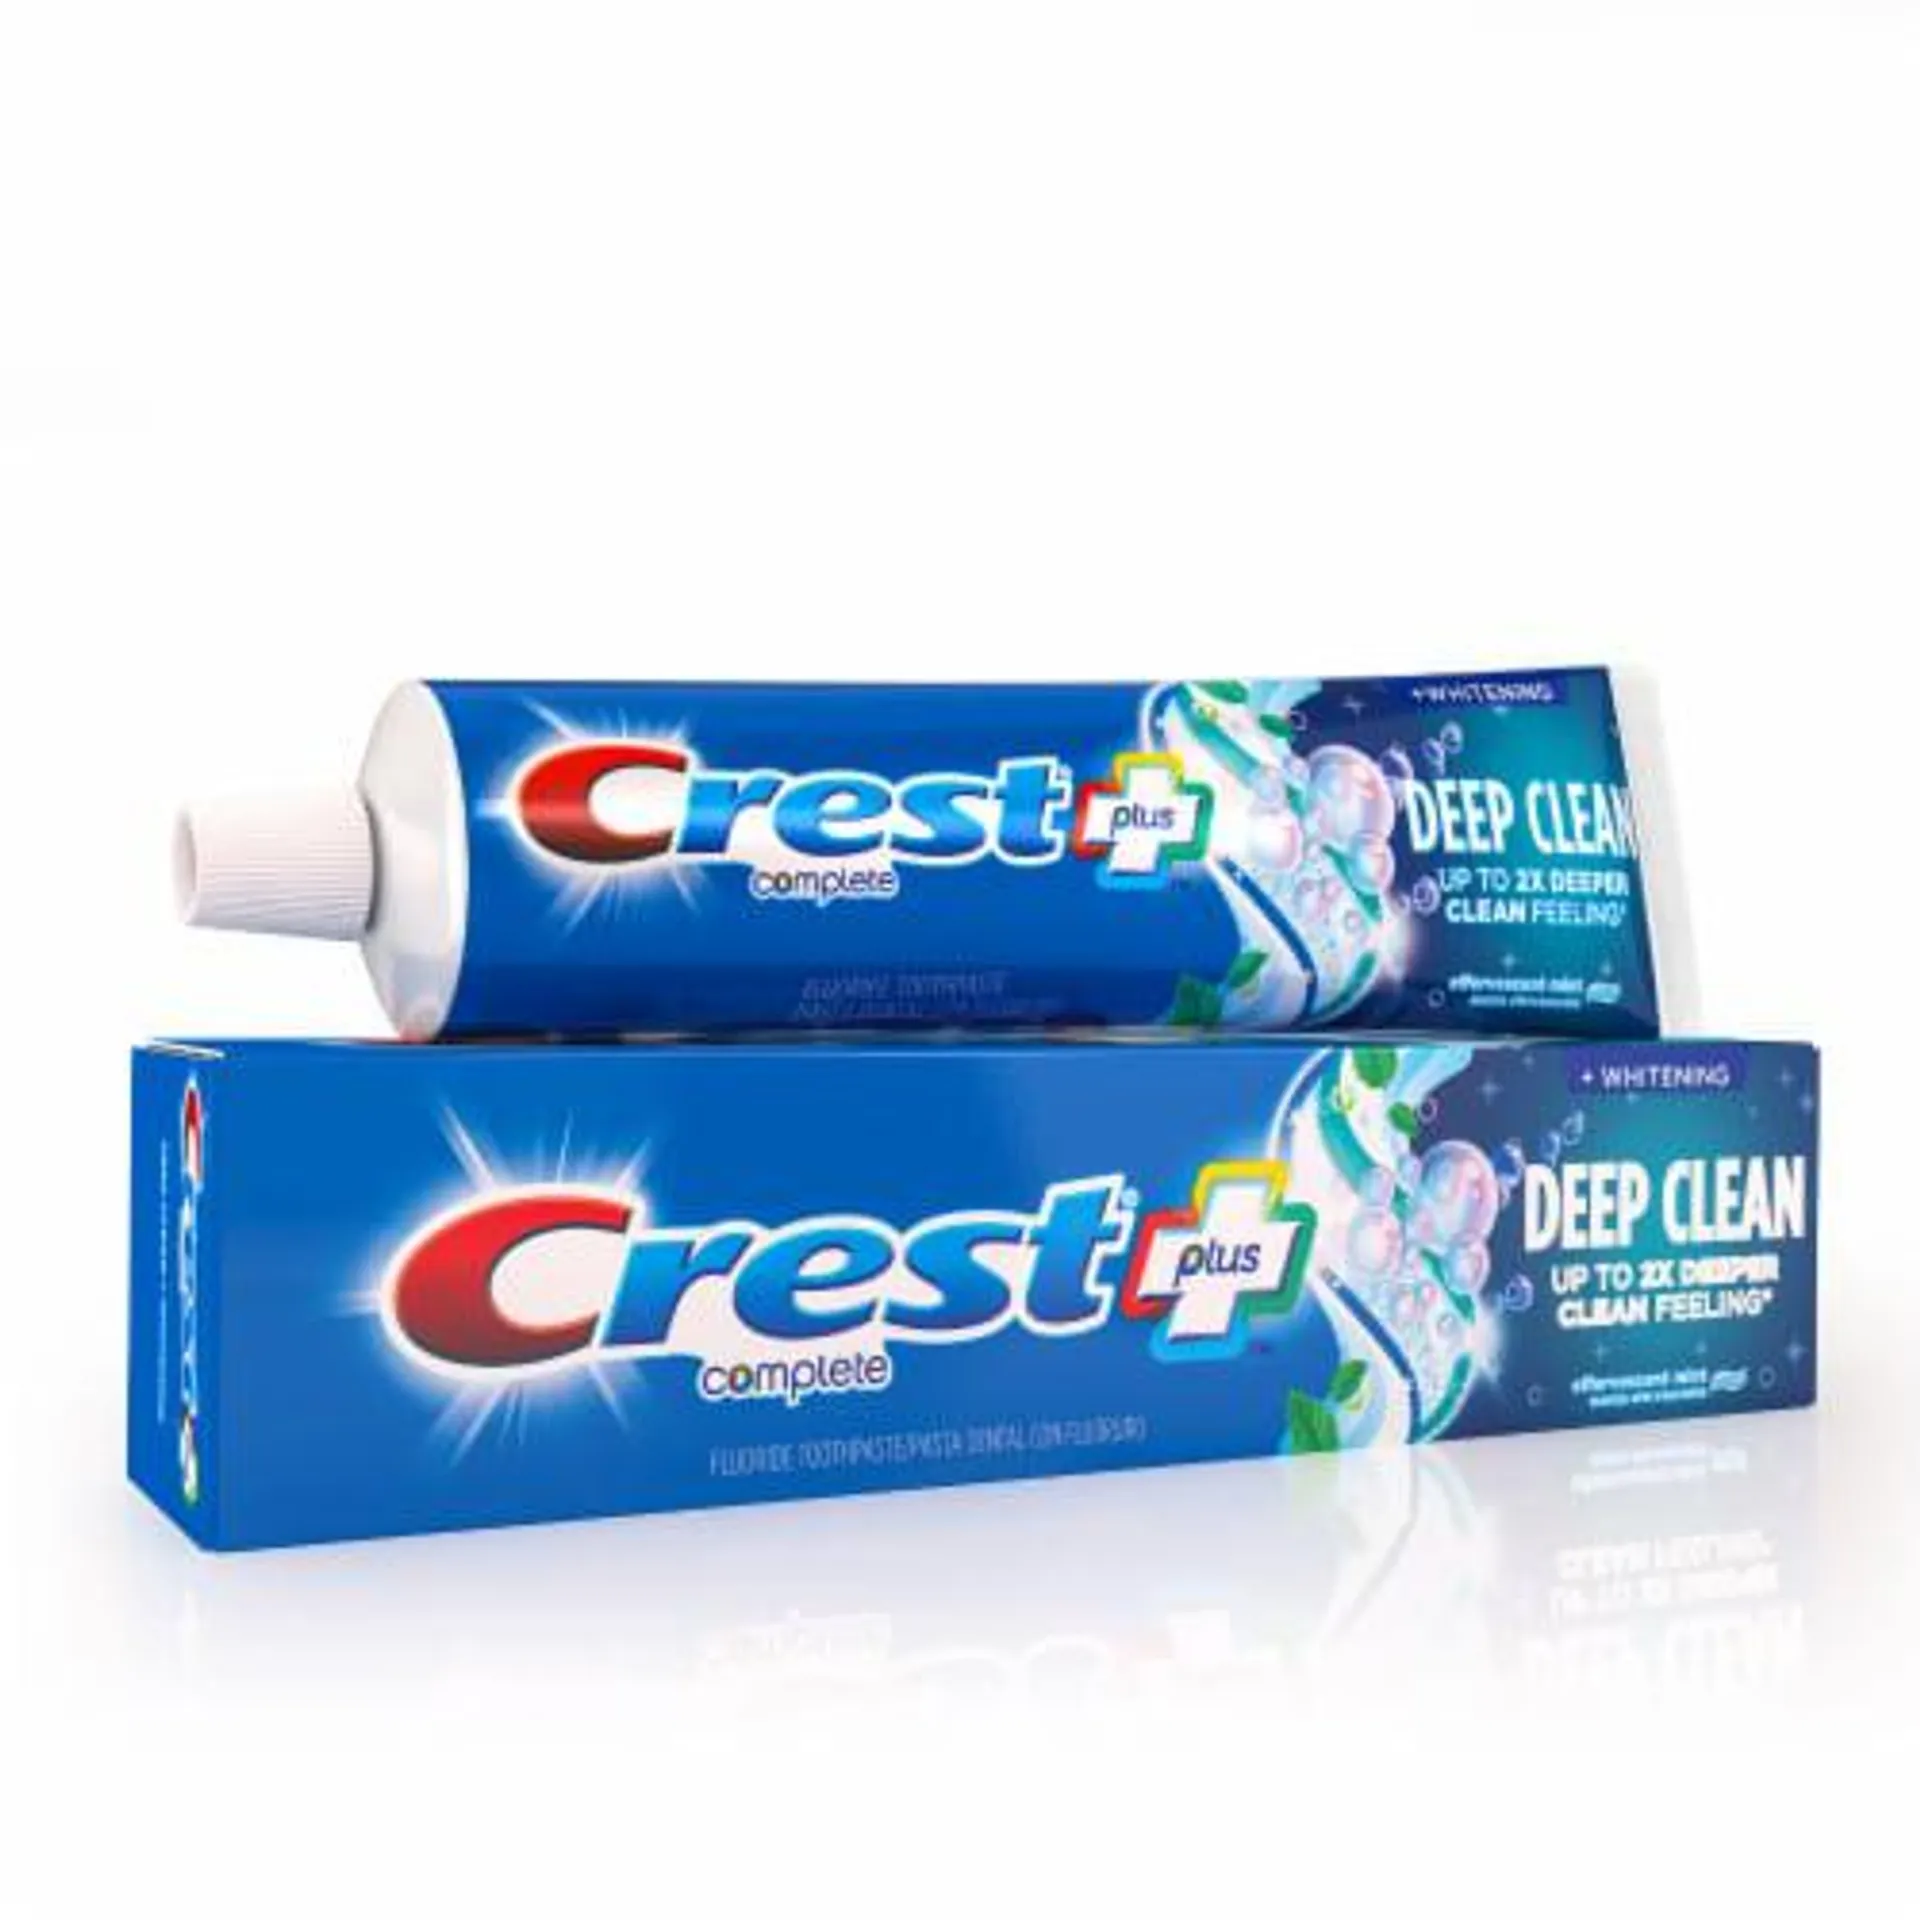 Crest Effervescent Mint Complete Plus Deep Clean Complete Whitening Toothpaste